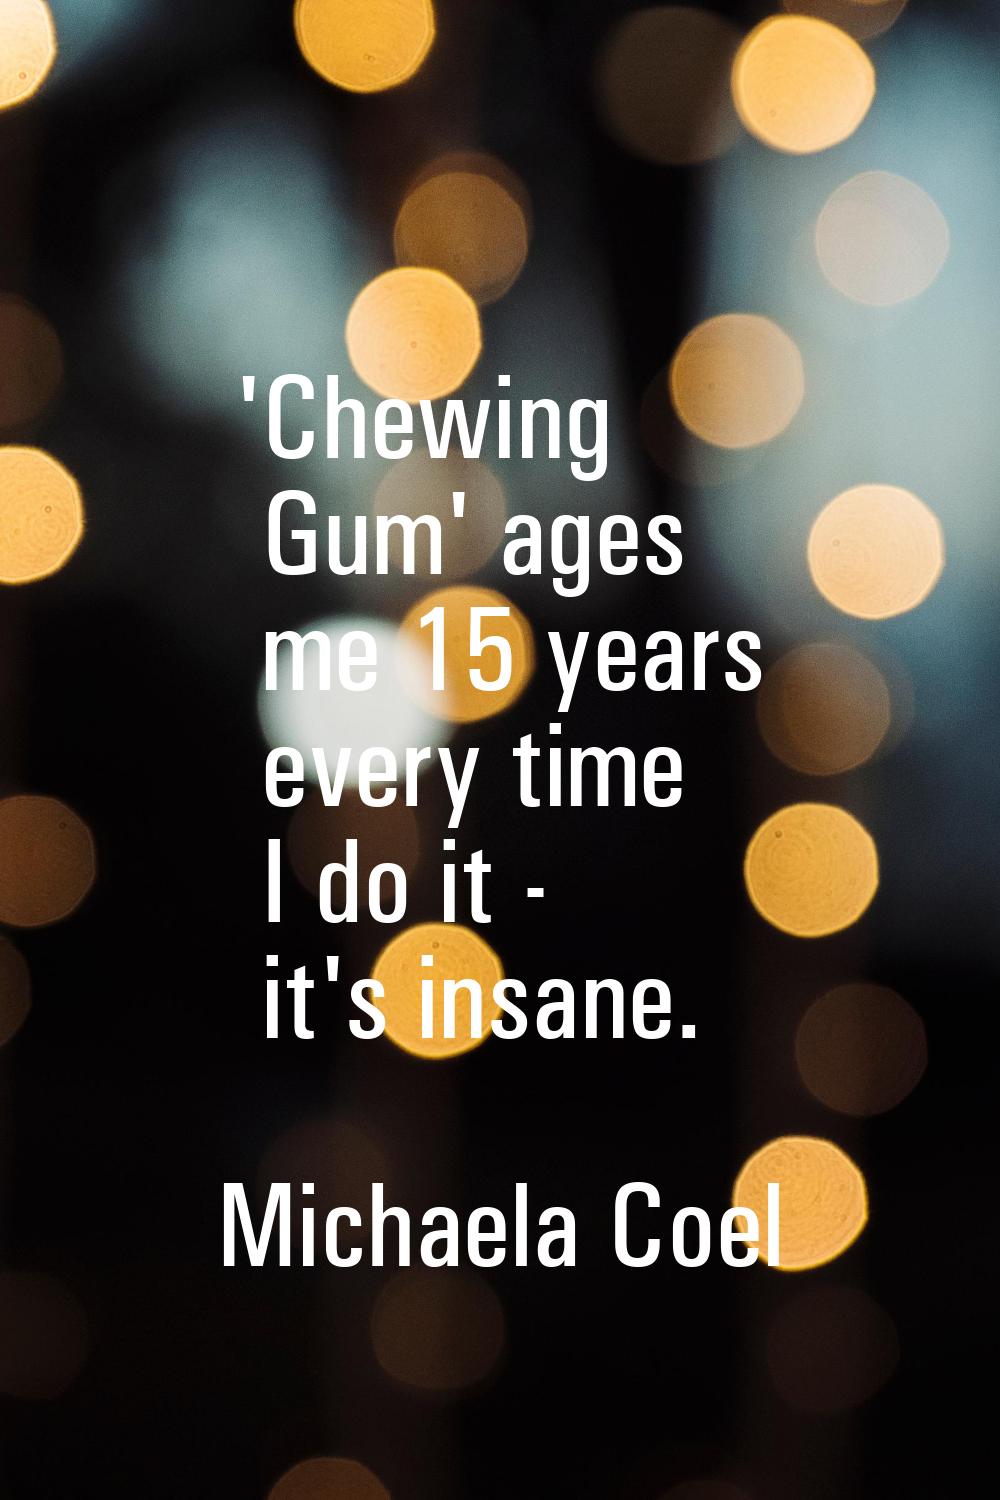 'Chewing Gum' ages me 15 years every time I do it - it's insane.